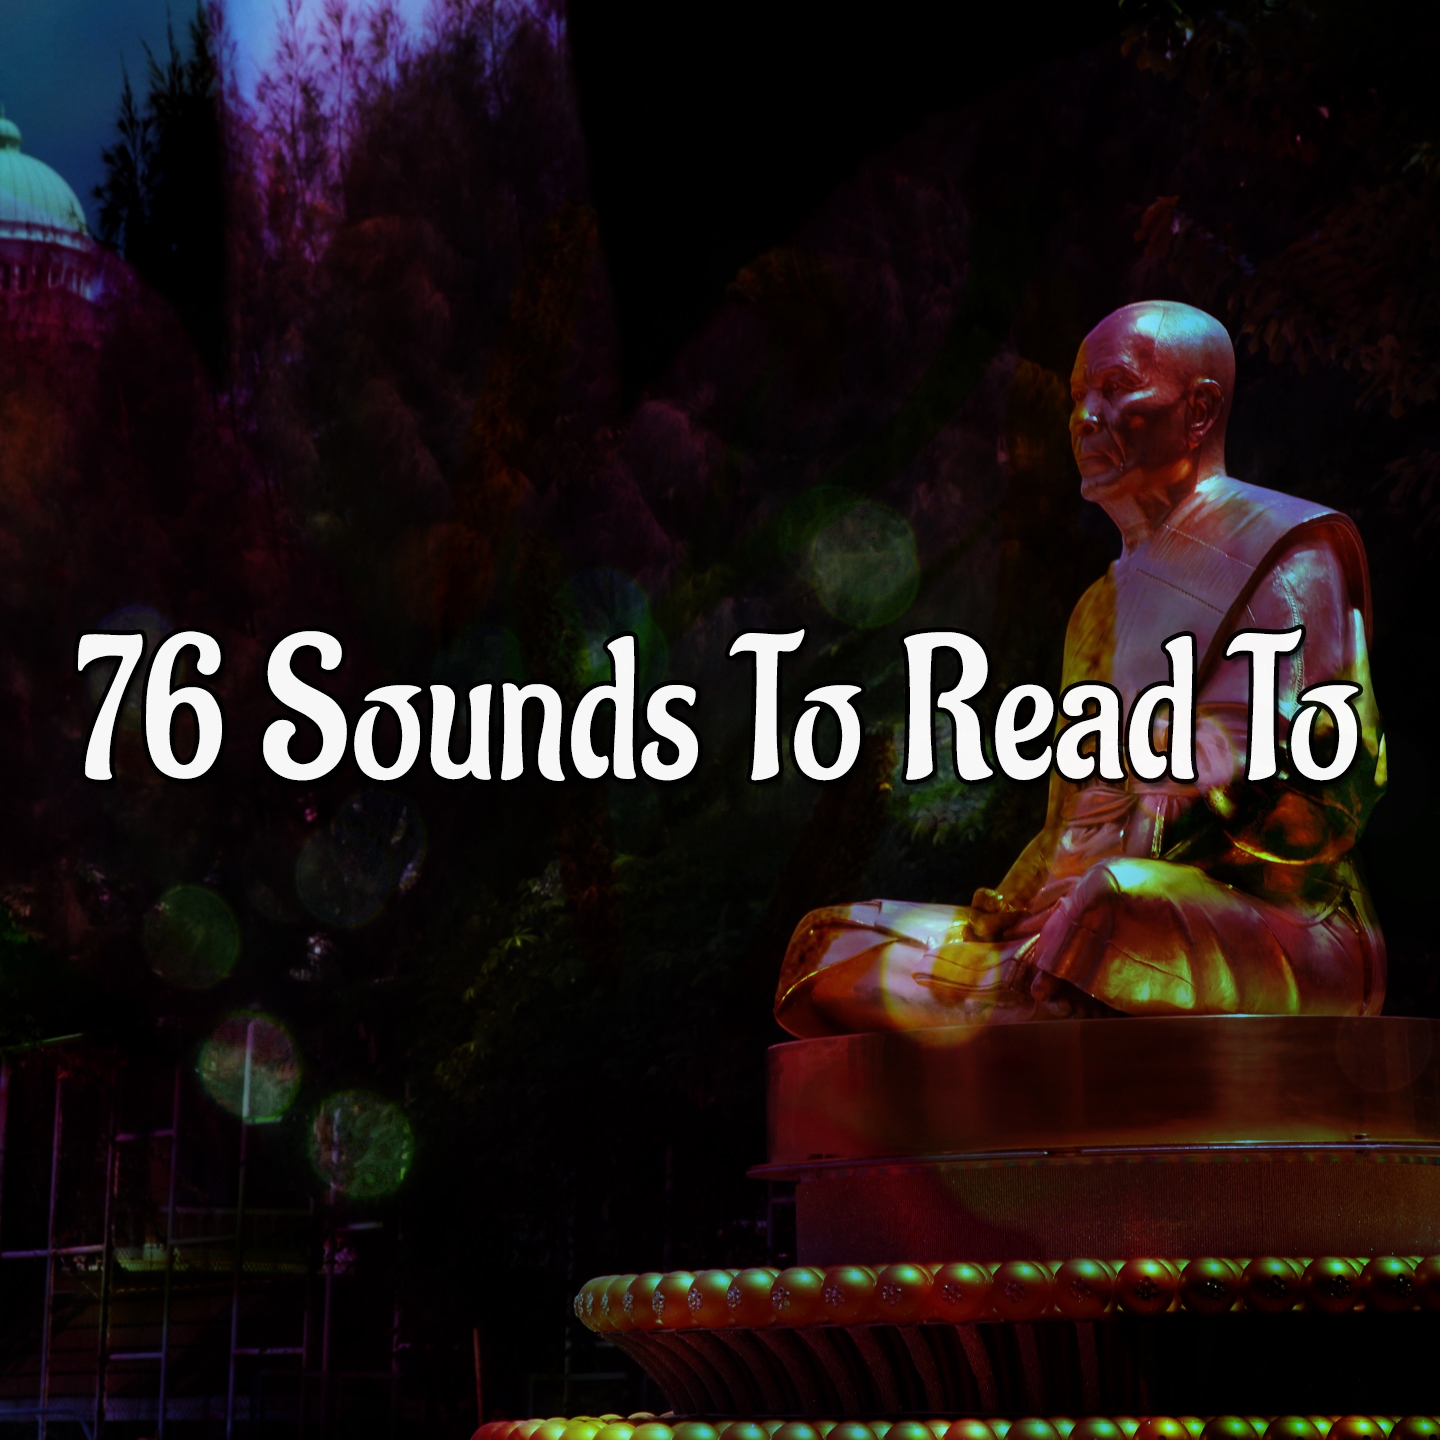 76 Sounds To Read To